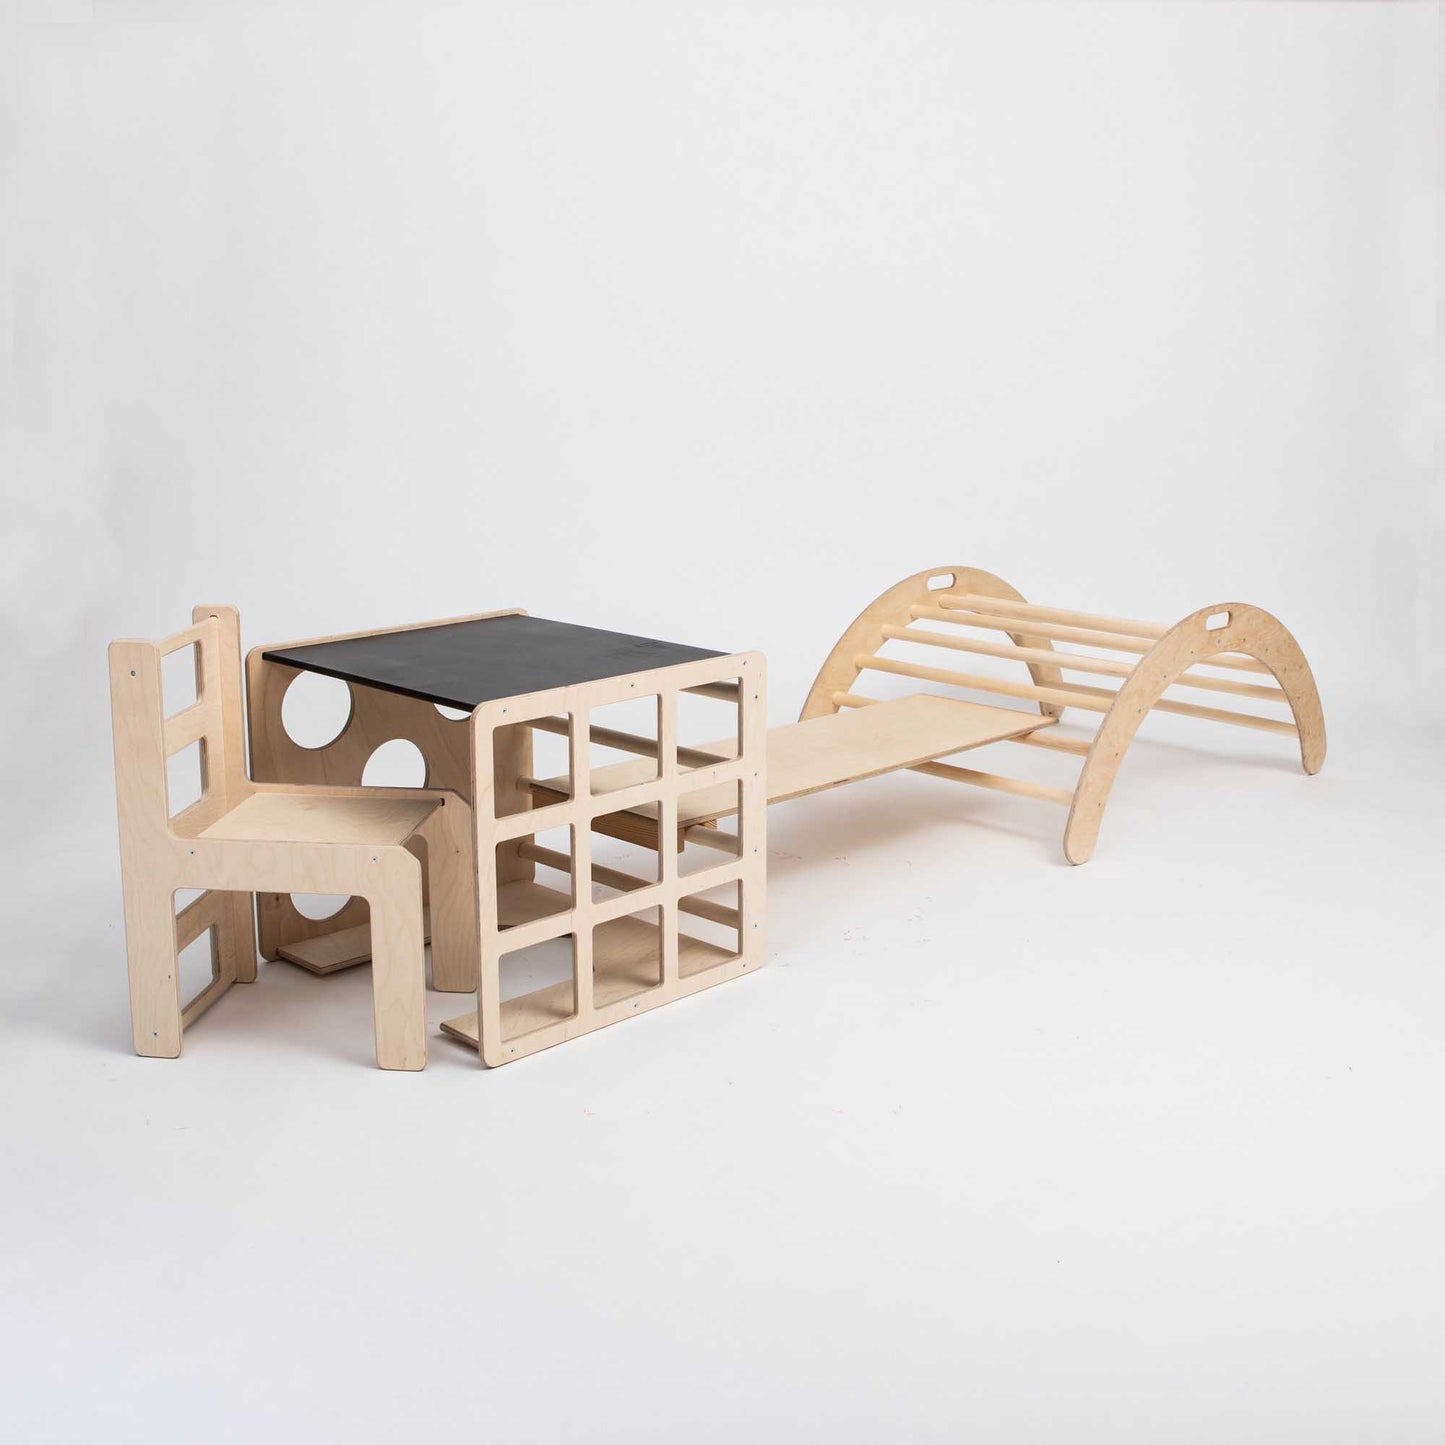 A Sweet Home From Wood wooden chair, a desk, and an activity play set consisting of a Climbing arch, a Transformable climbing cube, a table and chair set, and a ramp.